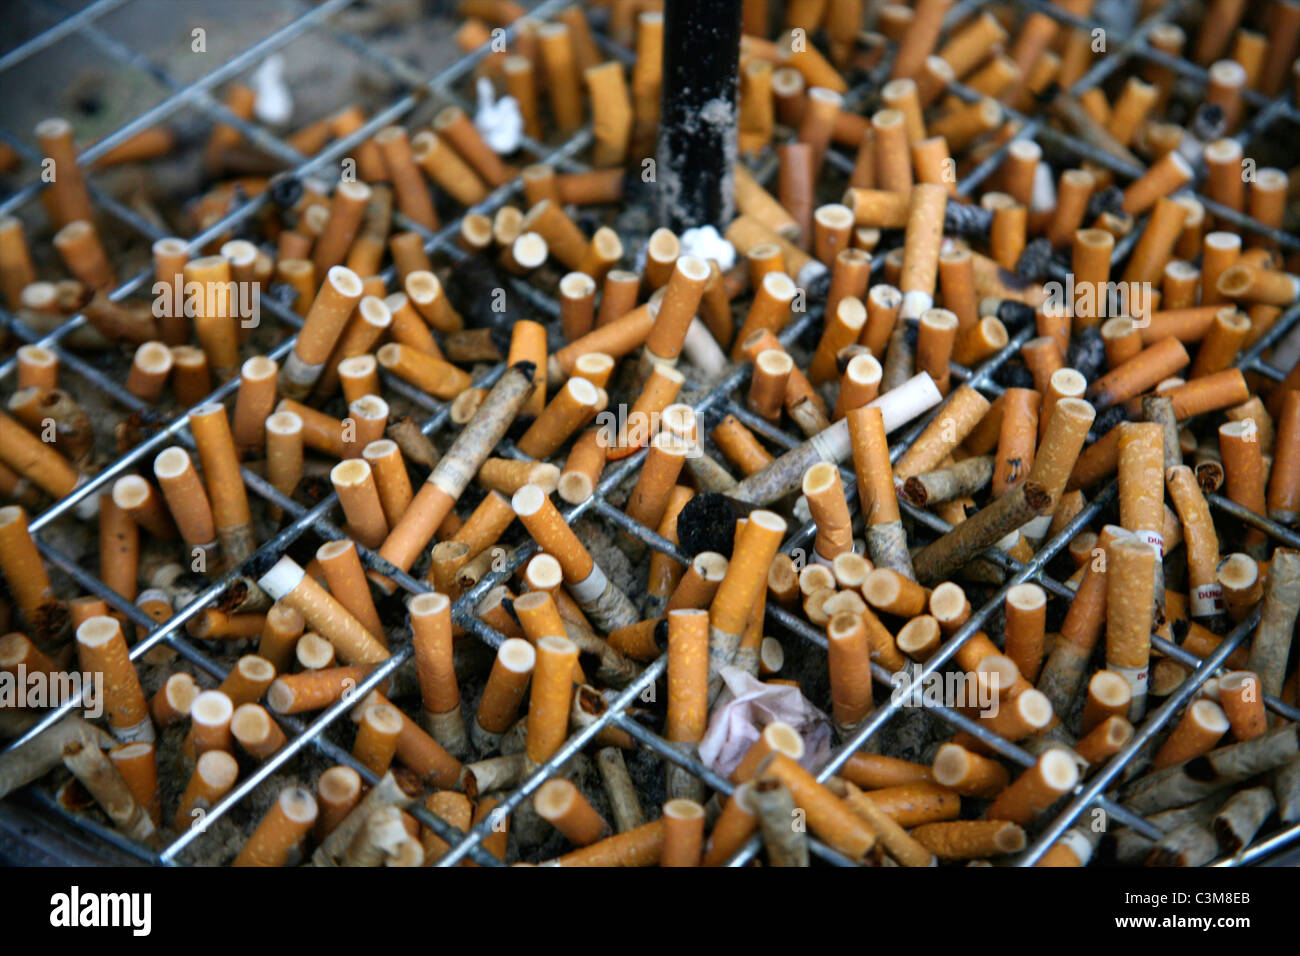 smoking is forbidden in publi places in Holland Stock Photo